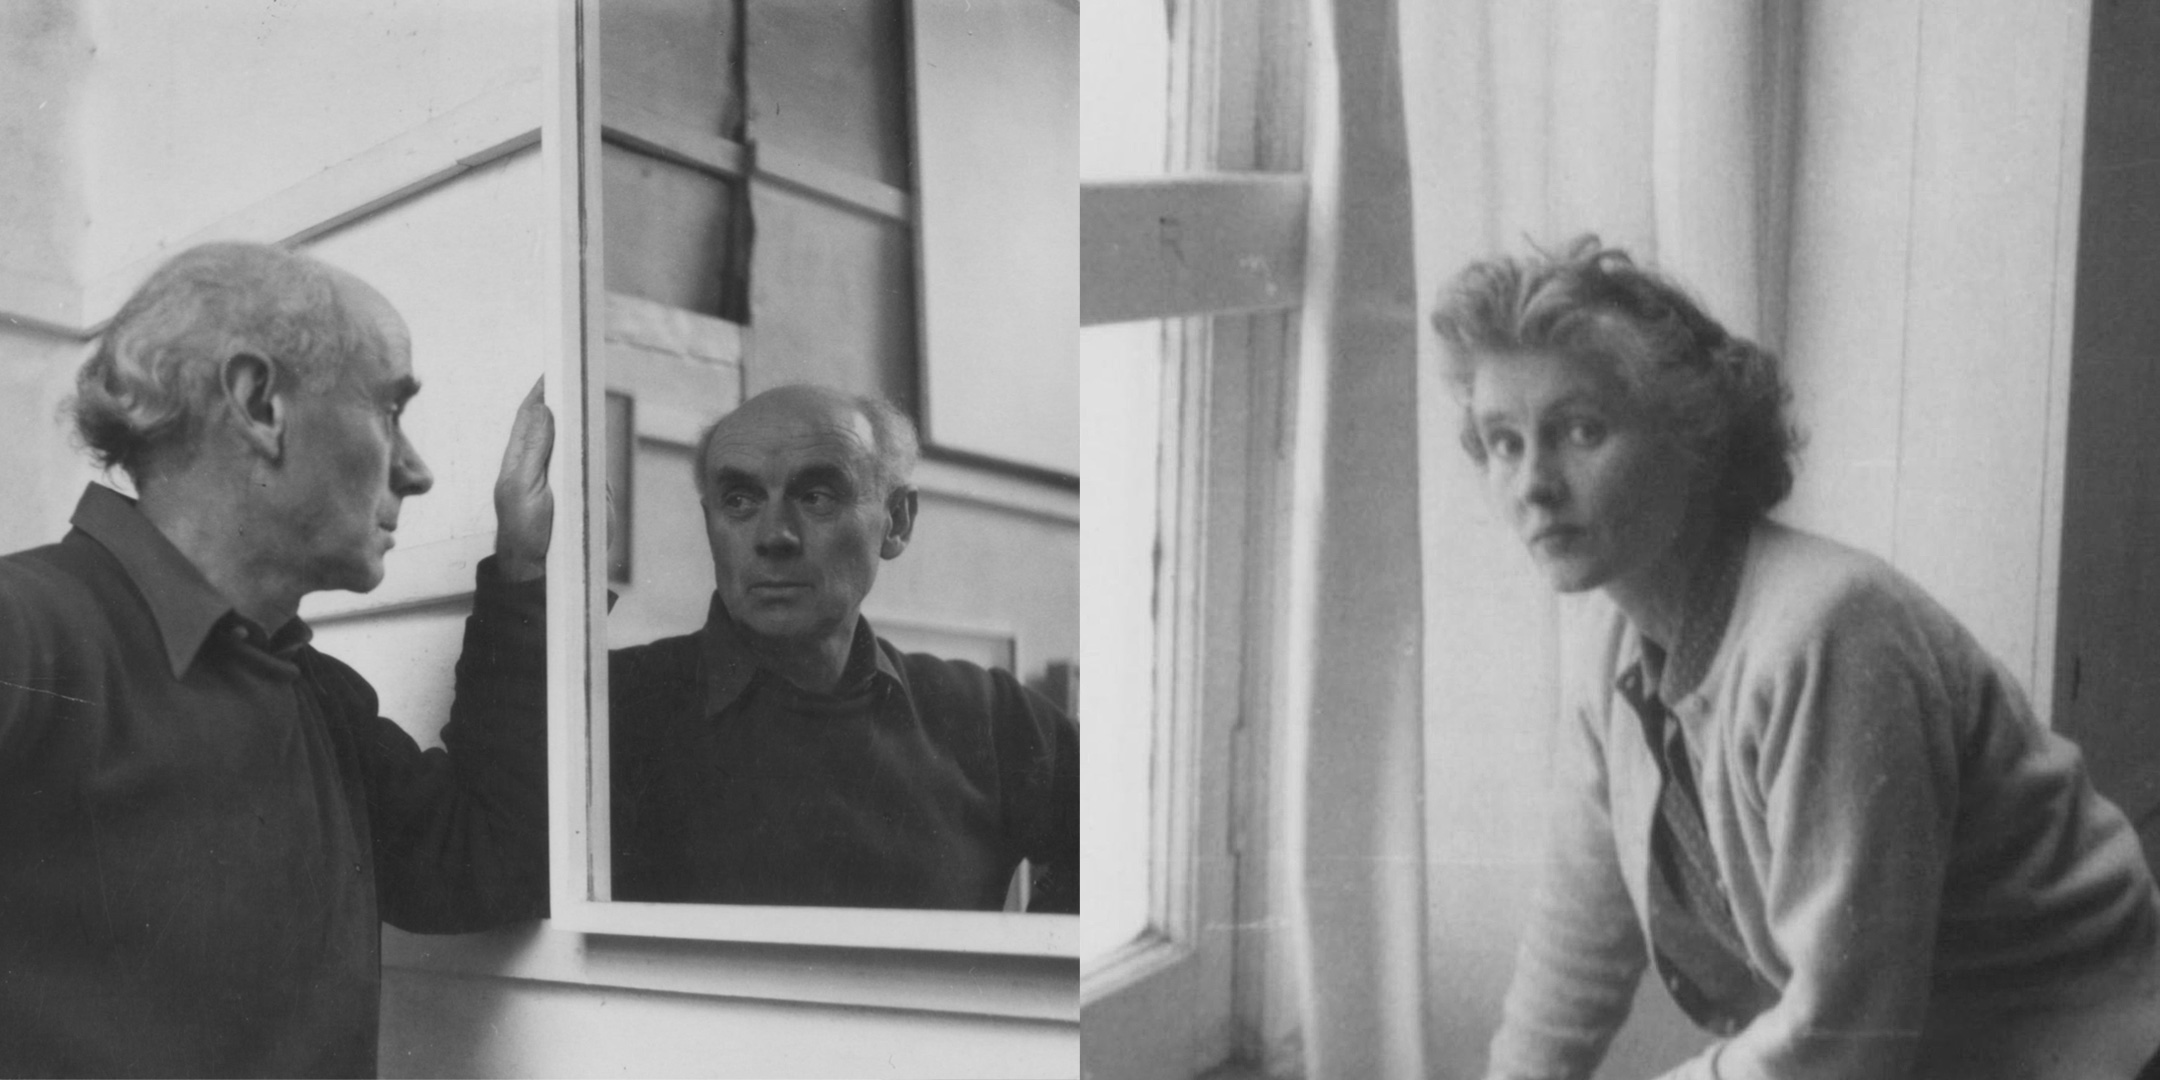 Two black and white photos of a man looking into a mirror and a women looking towards the camera next to a window